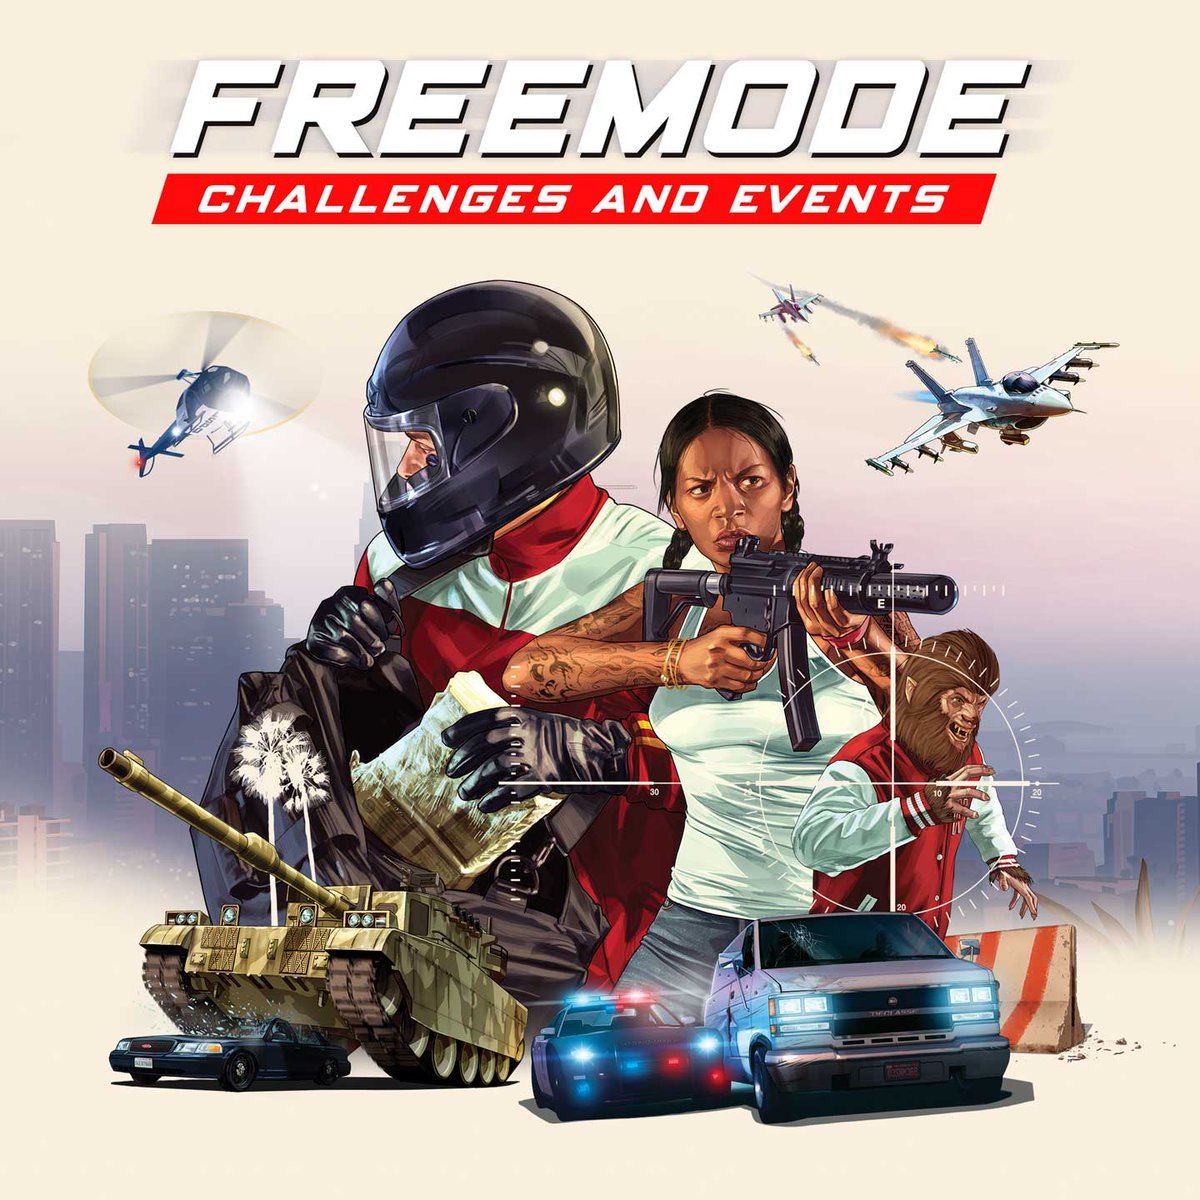 A new GTA Online event started on March 28 (available through April 3). This week Freemode Challenges and Events rewards are doubled. Additionally, Buried Stashes and Shipwrecks will yield 3X GTA$ and RP. Engaging in the latest Community Series Jobs will also grant players 3X